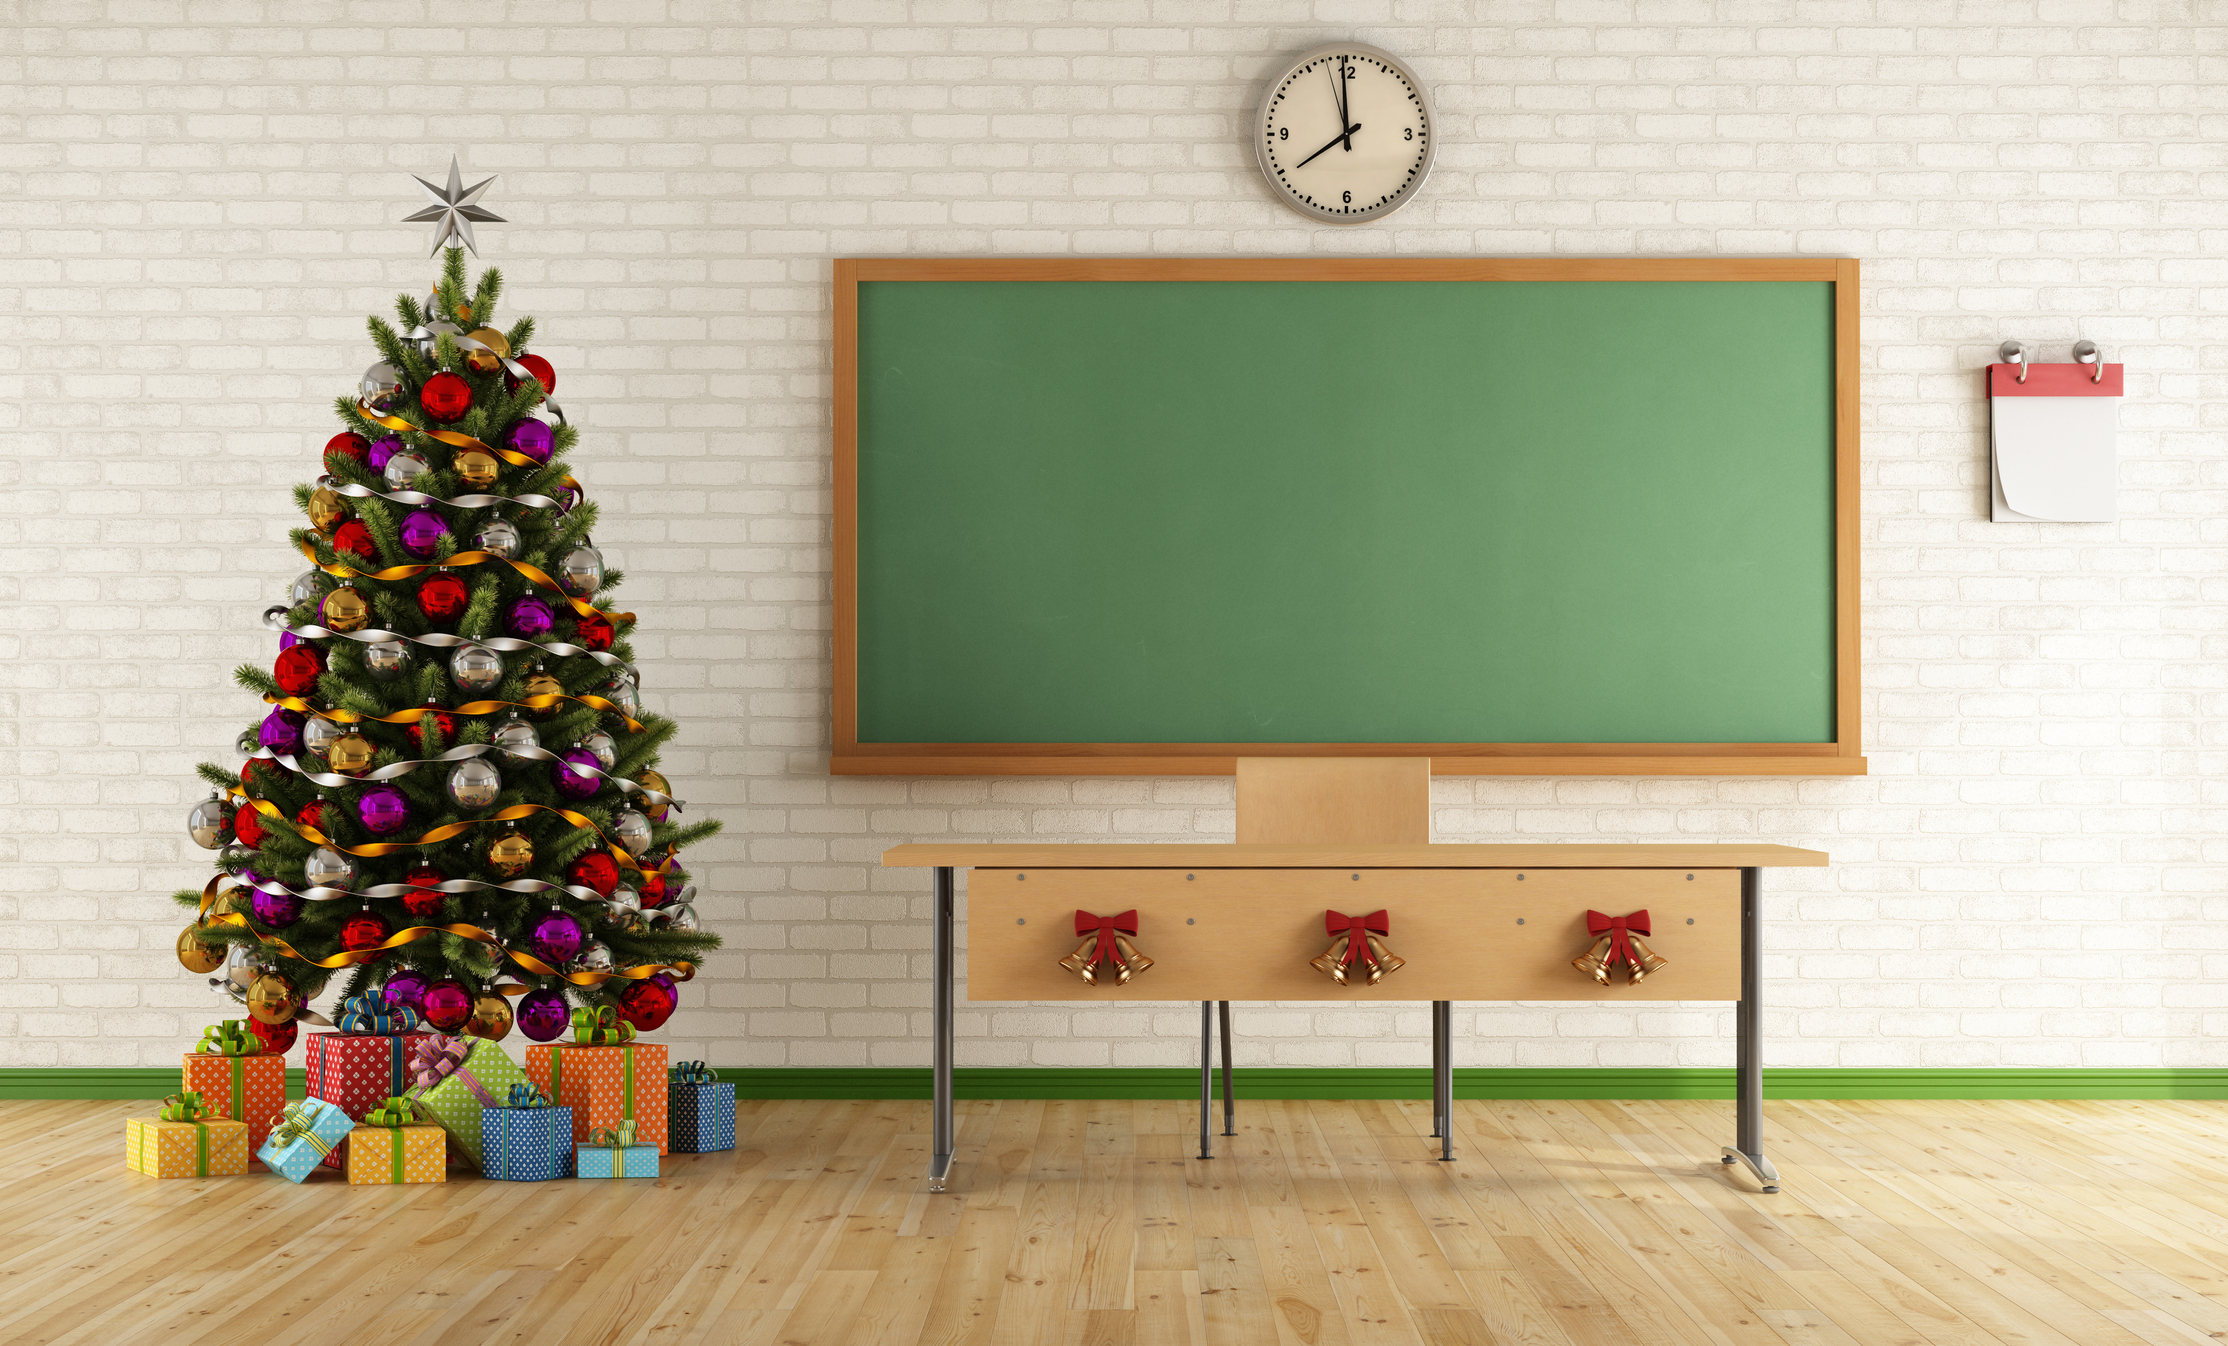 How the Grinch Stole Christmas-Themed EFL Activities